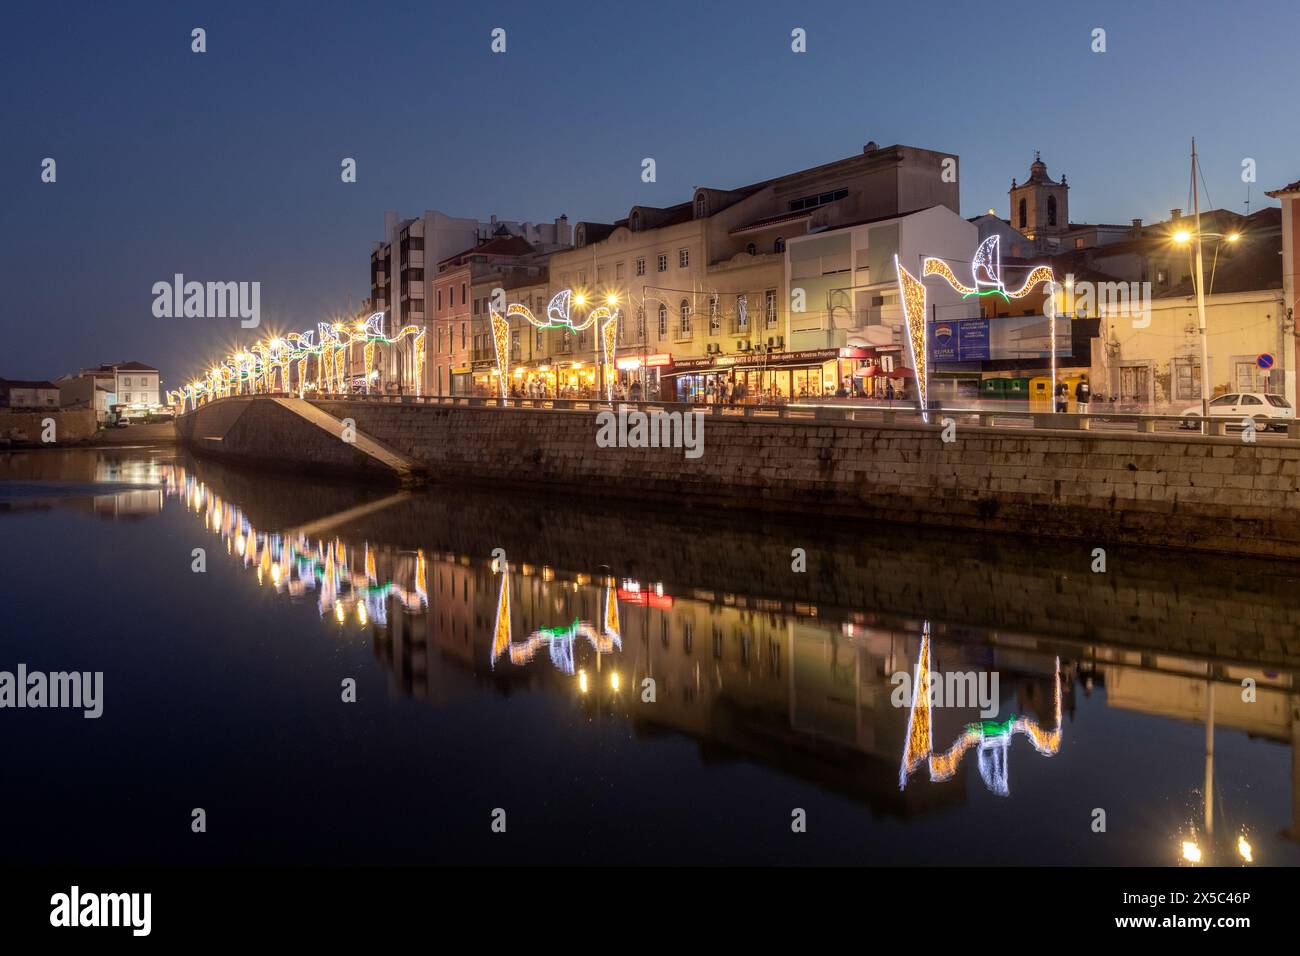 Peniche, Portugal - August 09, 2023: Restaurant street in Peniche, Portugal, seen at dusk with party lights and reflections in the water. Stock Photo